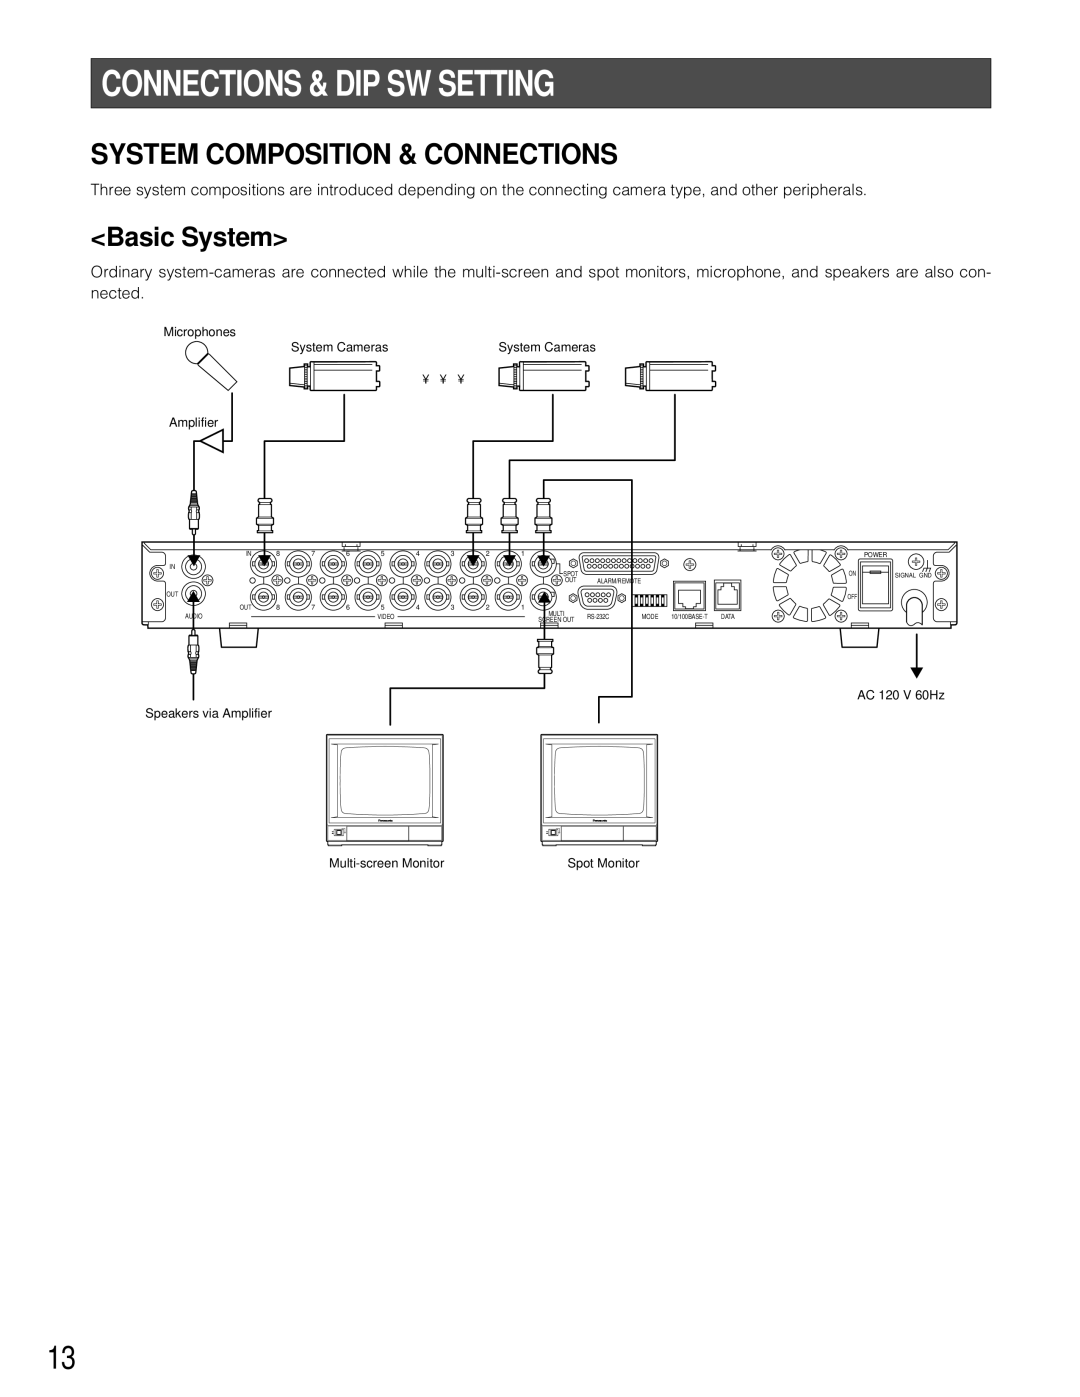 Panasonic WJ-HD200 manual Connections & Dip Sw Setting, System Composition & Connections, Basic System 